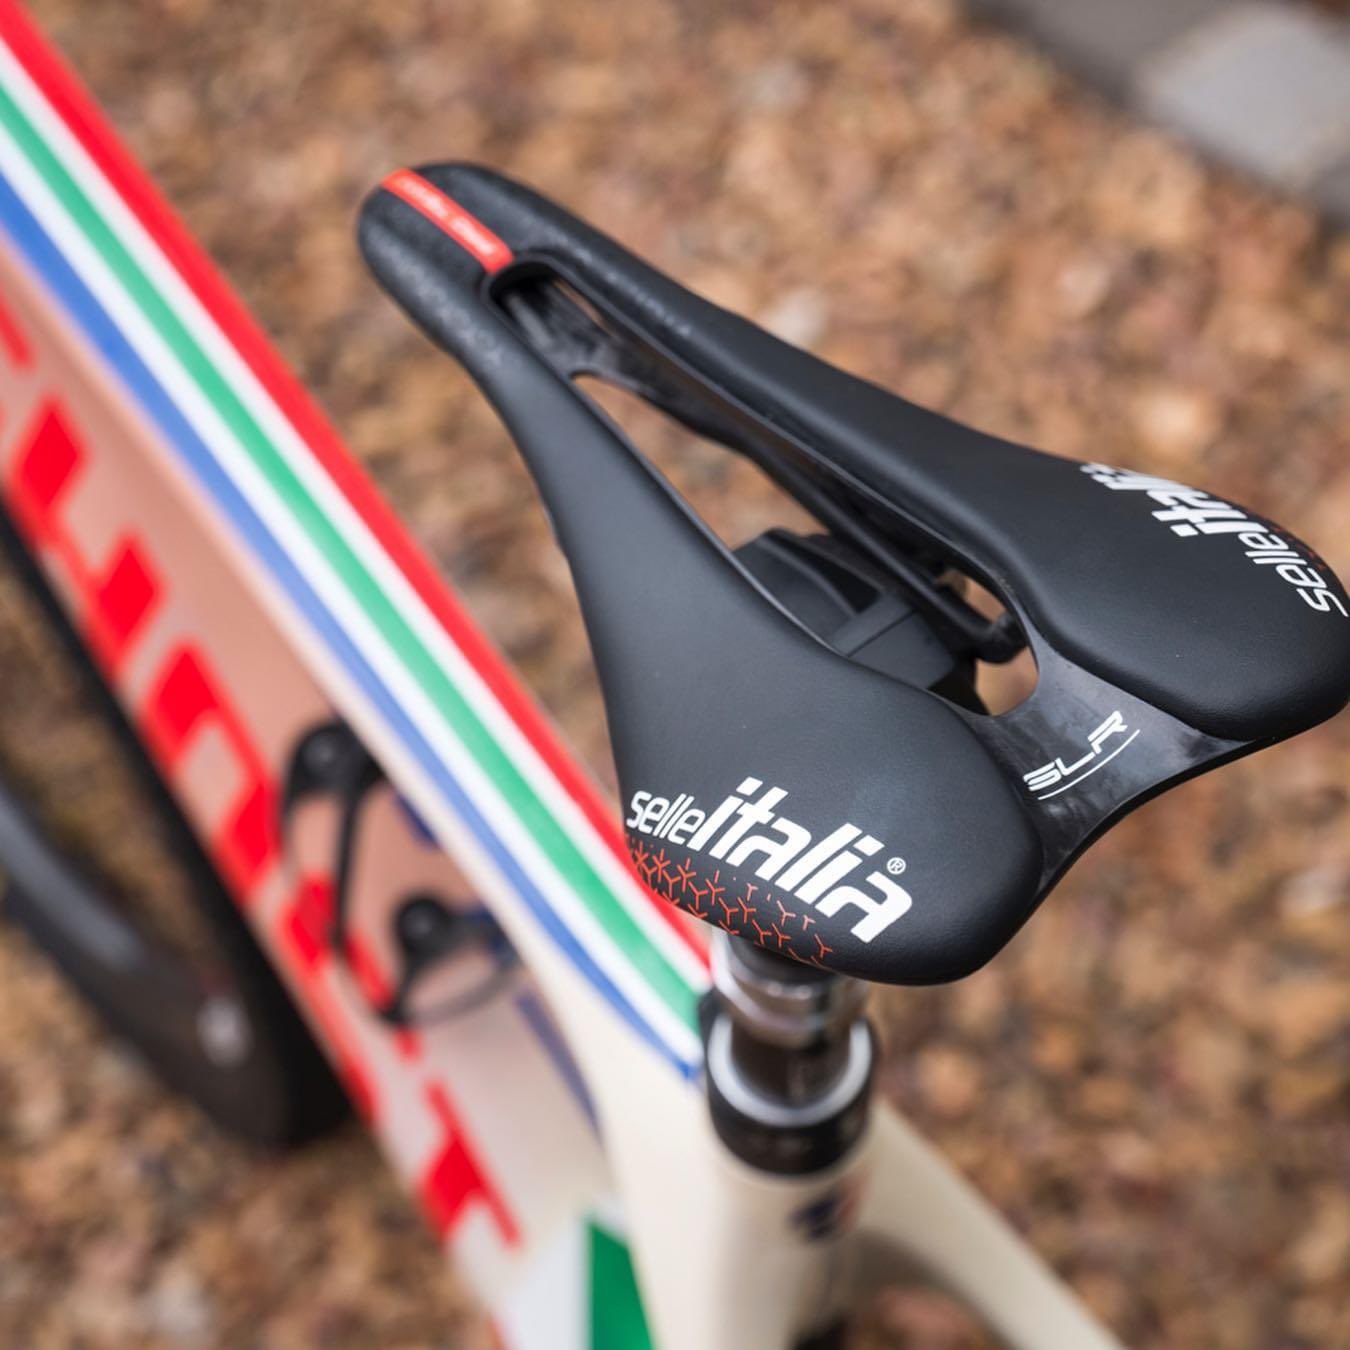 selle_italia on X: "SLR Boost Pro Team Kit Carbonio Superflow is the choice  of @GHOSTFactoryRac girls for this years build up. Ph. @attentionbuilders  #girlsonghost #selleitalia #mtb https://t.co/vkuiIrehkX" / X